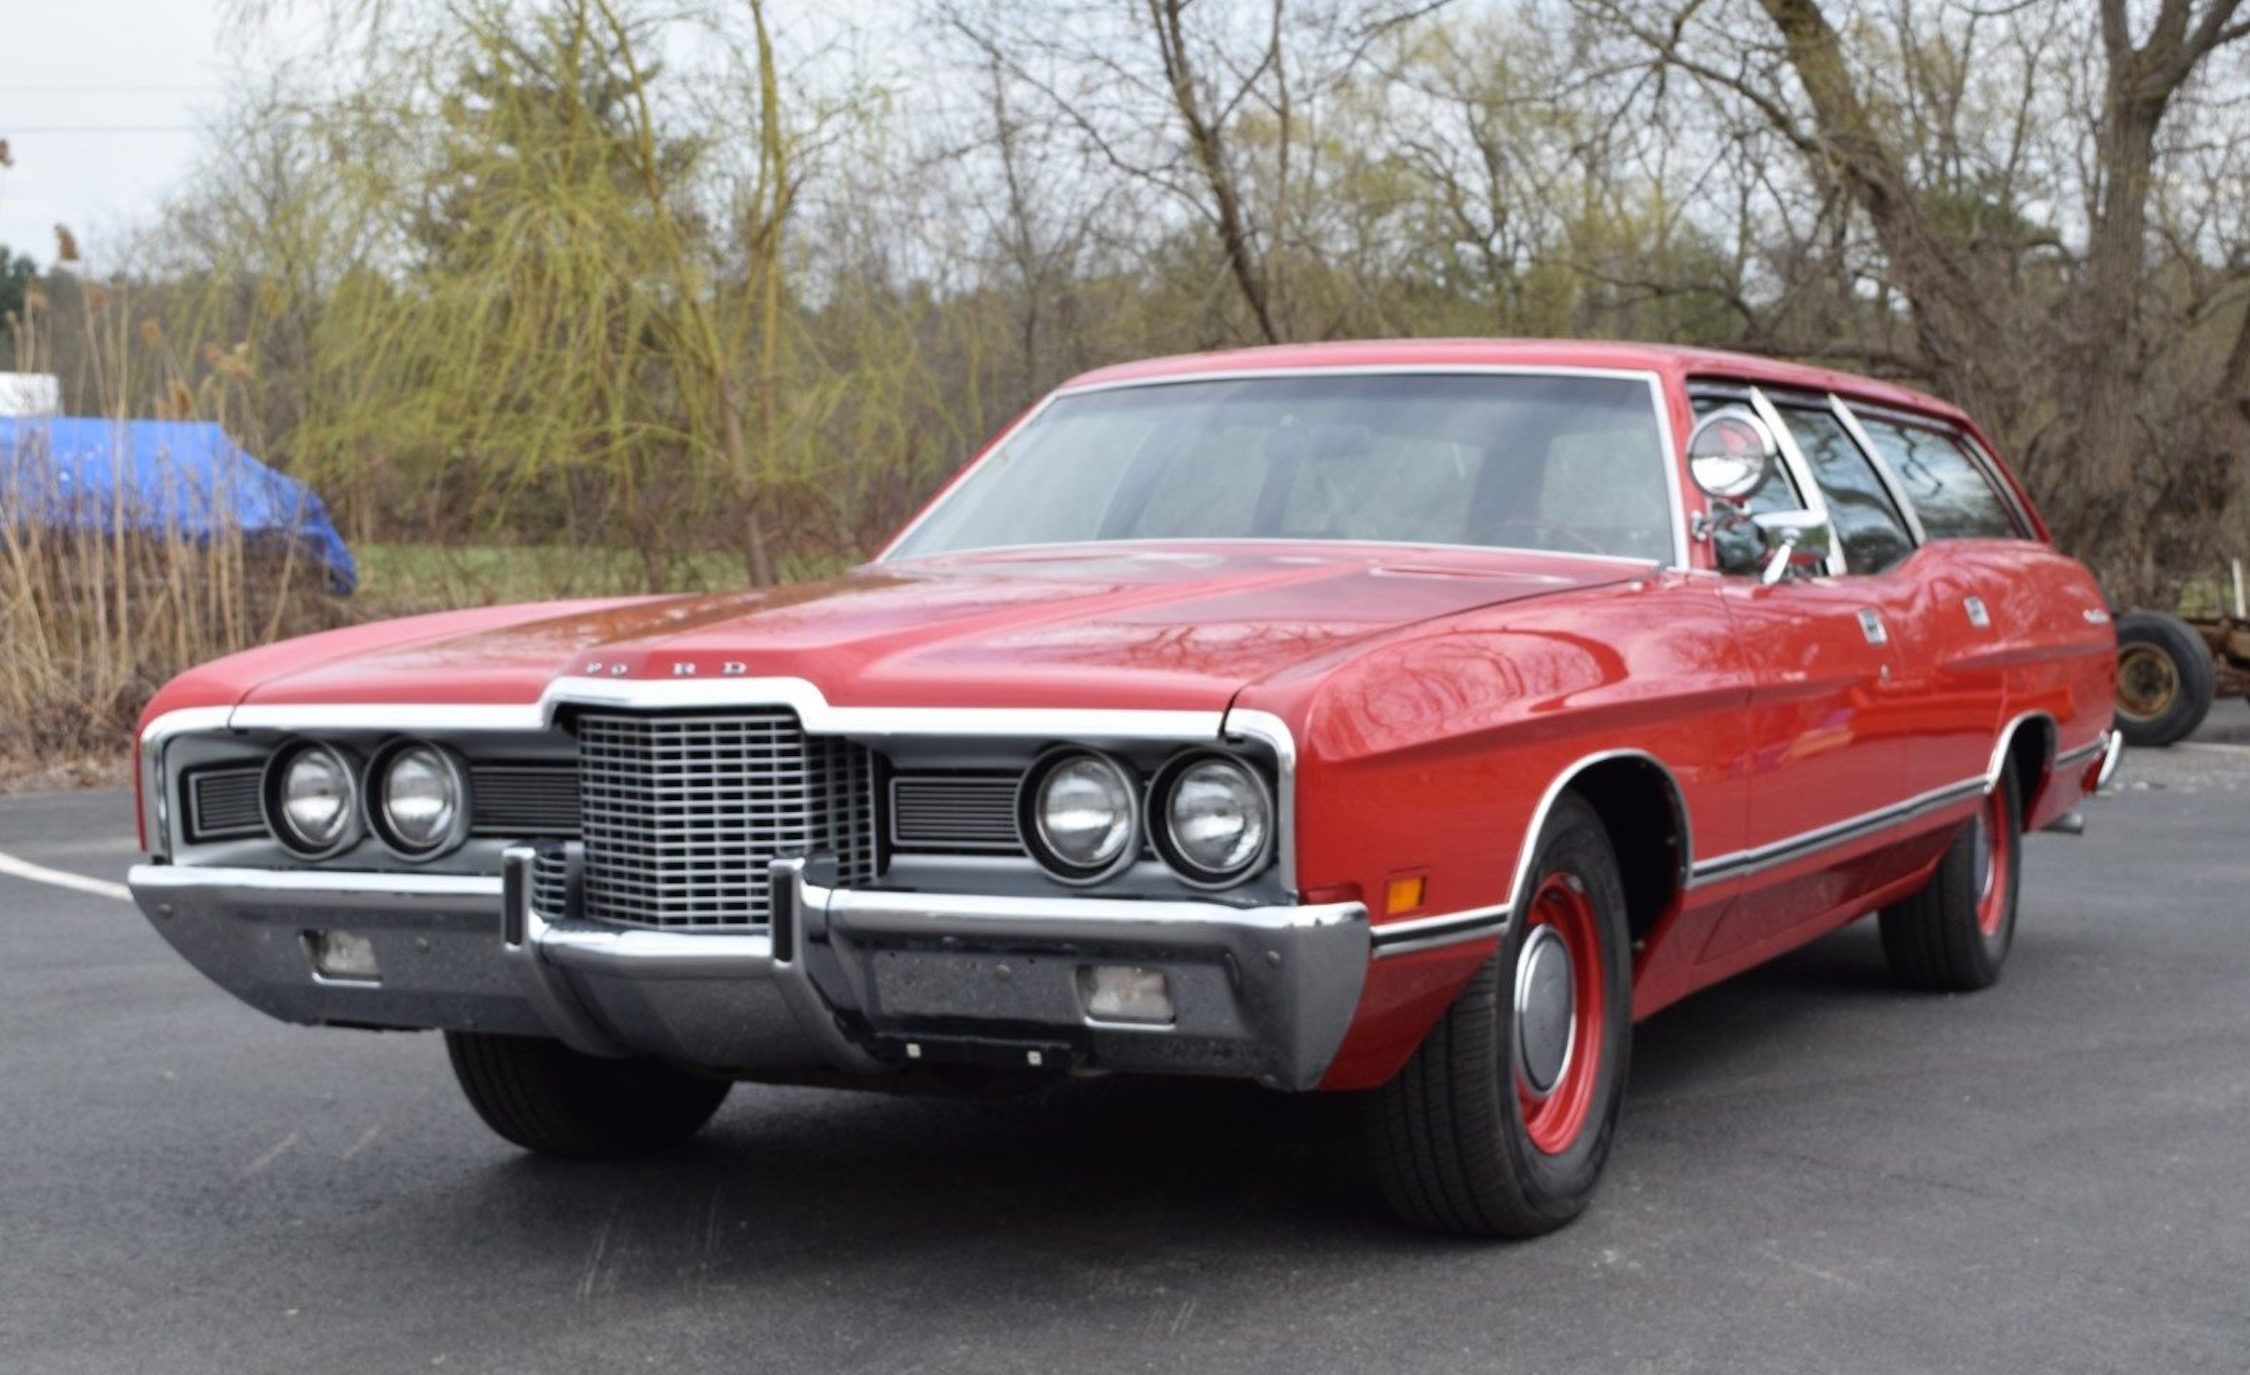 1971 Ford Galaxie 500 Wagon With Police V 8 Up For Auction